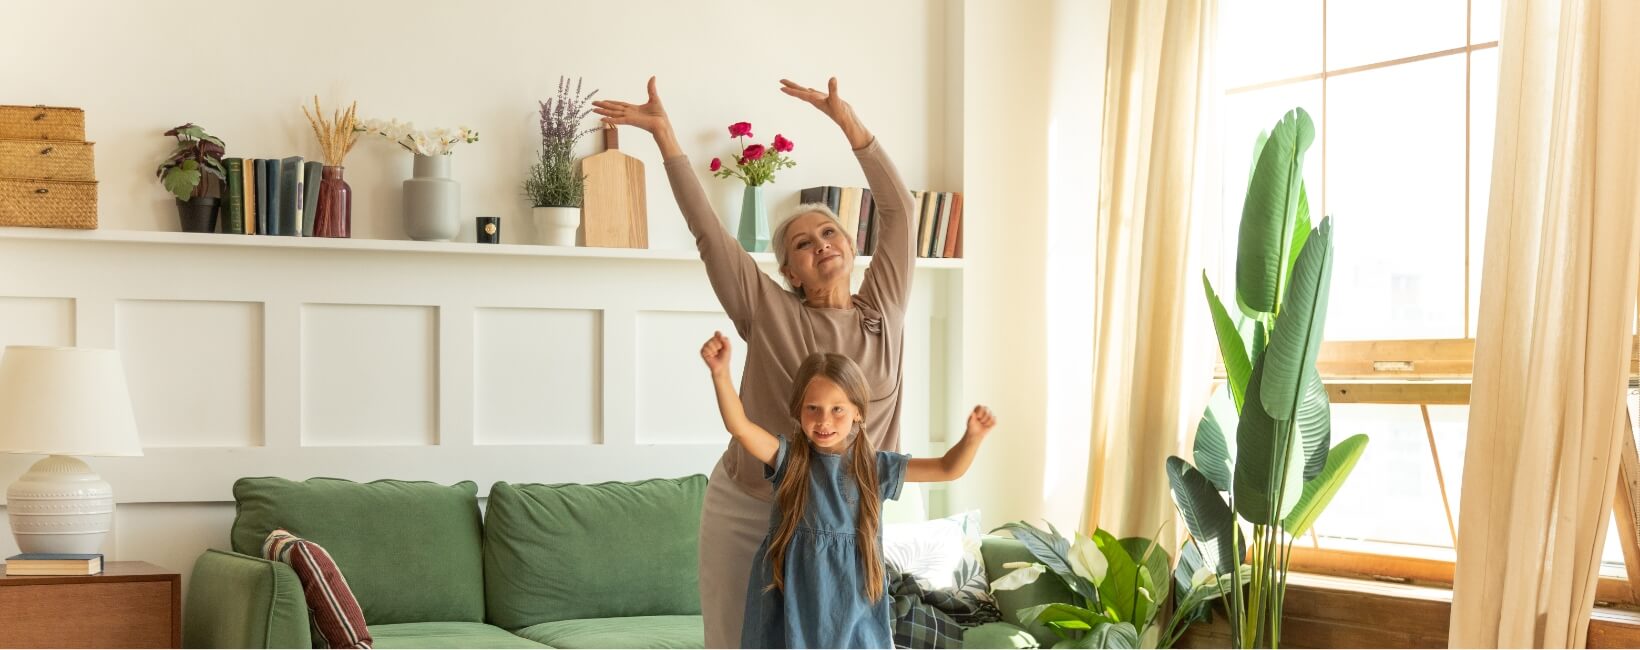 Grandmother and Granddaughter doing yoga poses in a living room